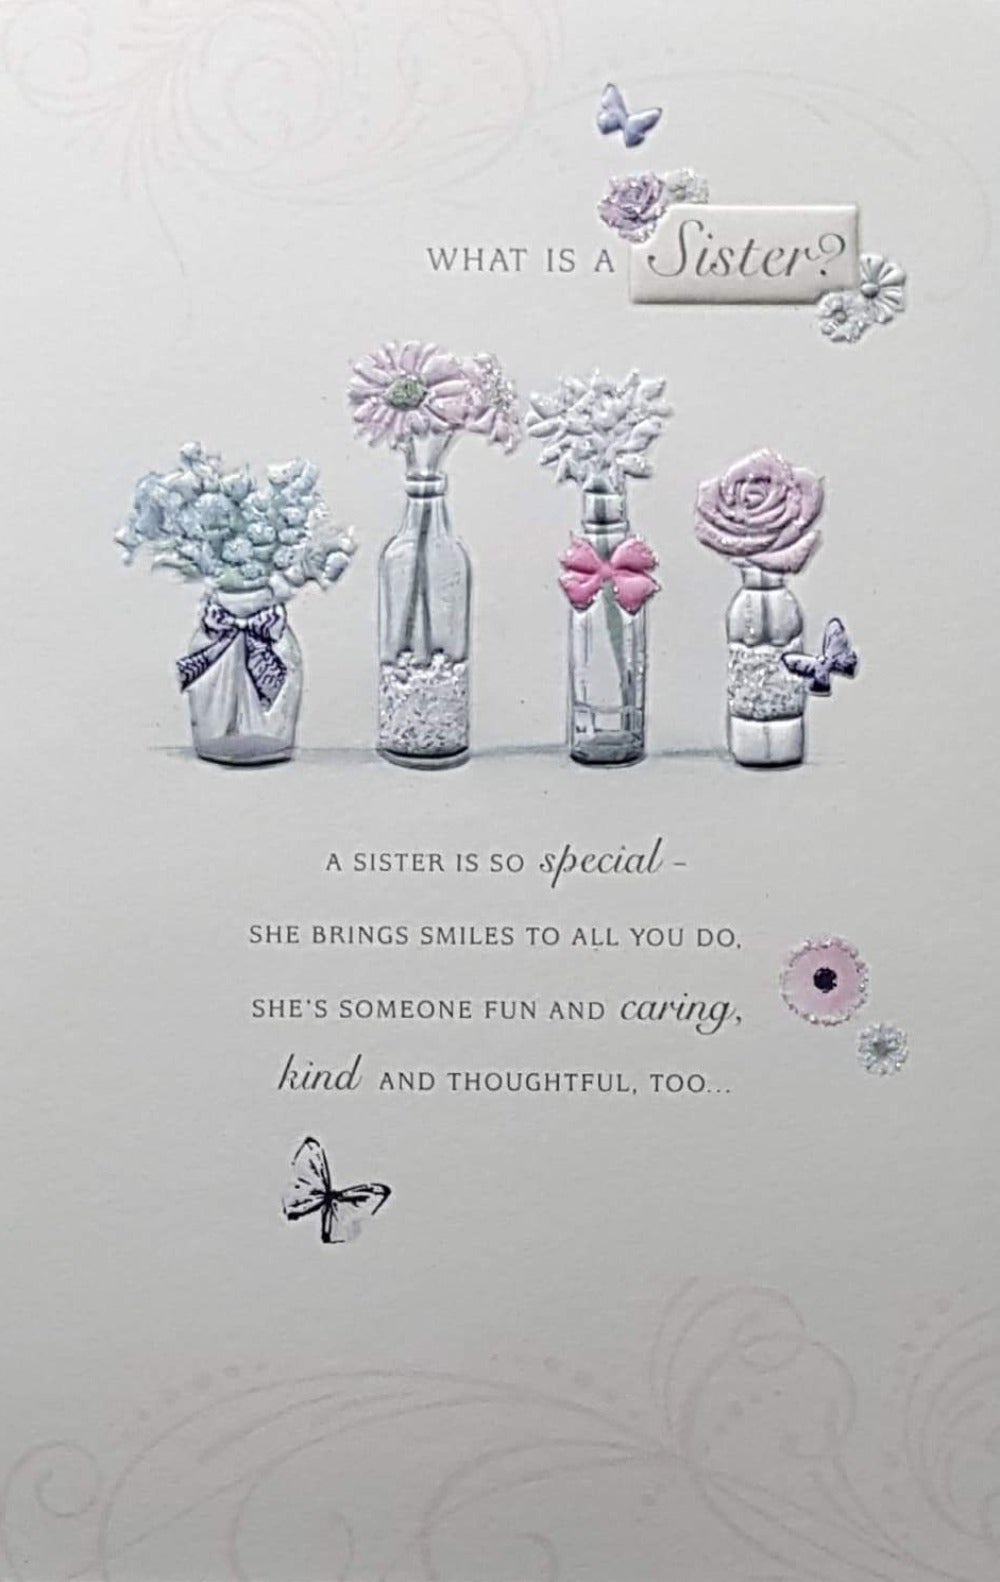 Birthday Card - Sister / 'Caring Kind Thoughtful' & Flower Vases